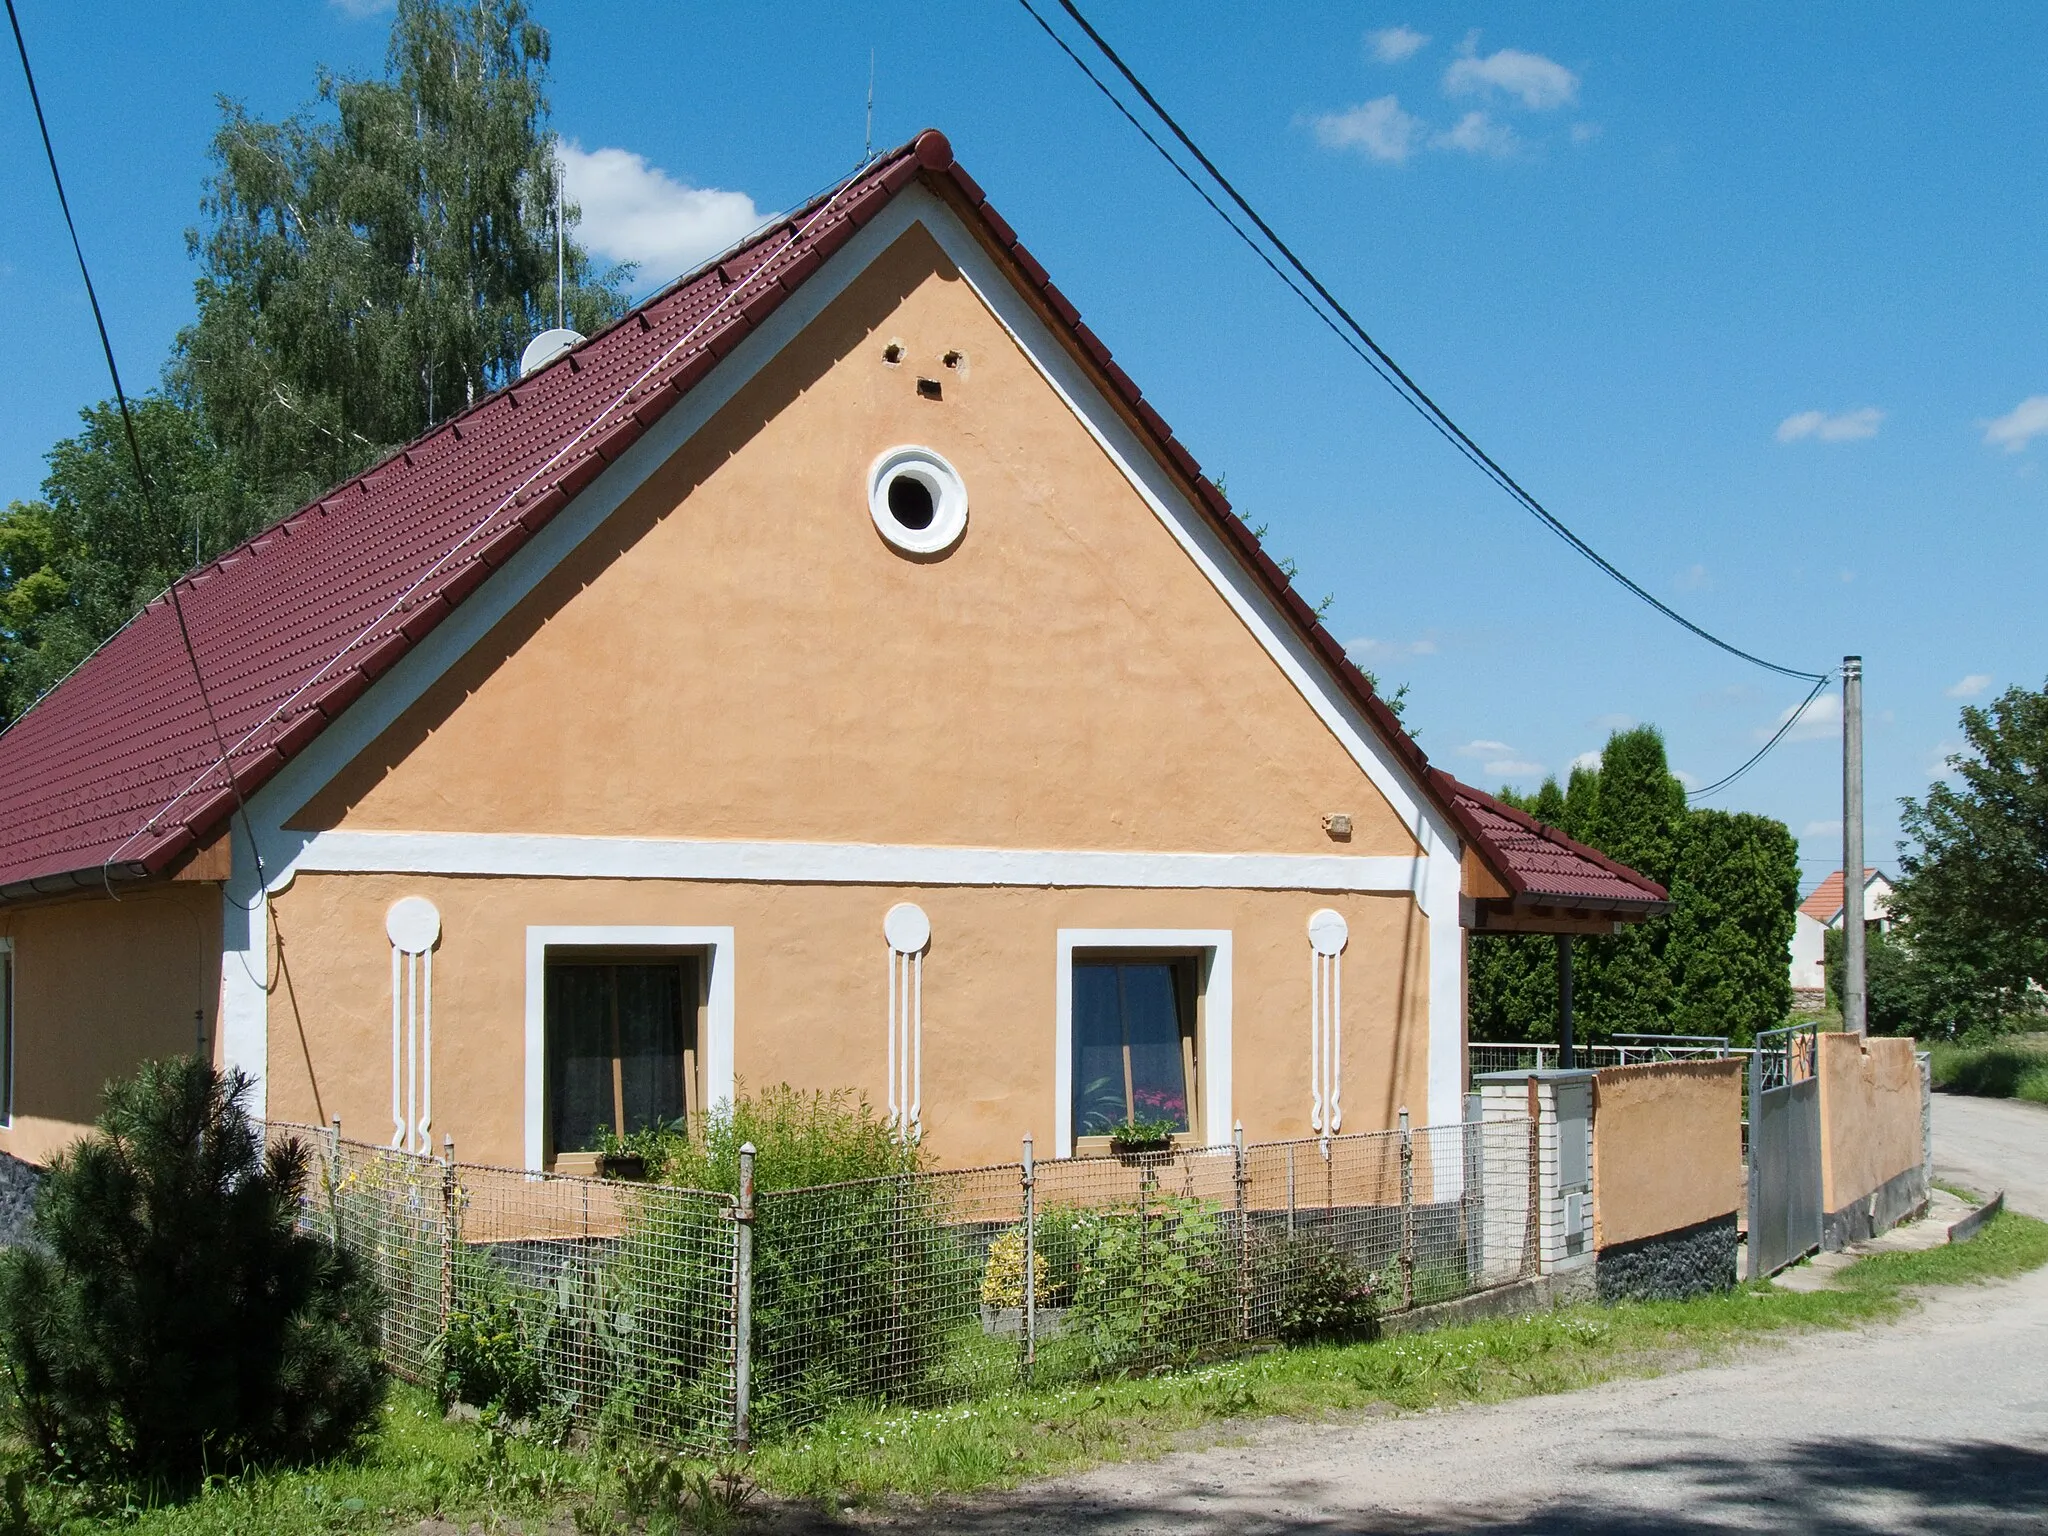 Photo showing: House No 13 in the village of Kvasejovice, Tábor district, Czech Republic